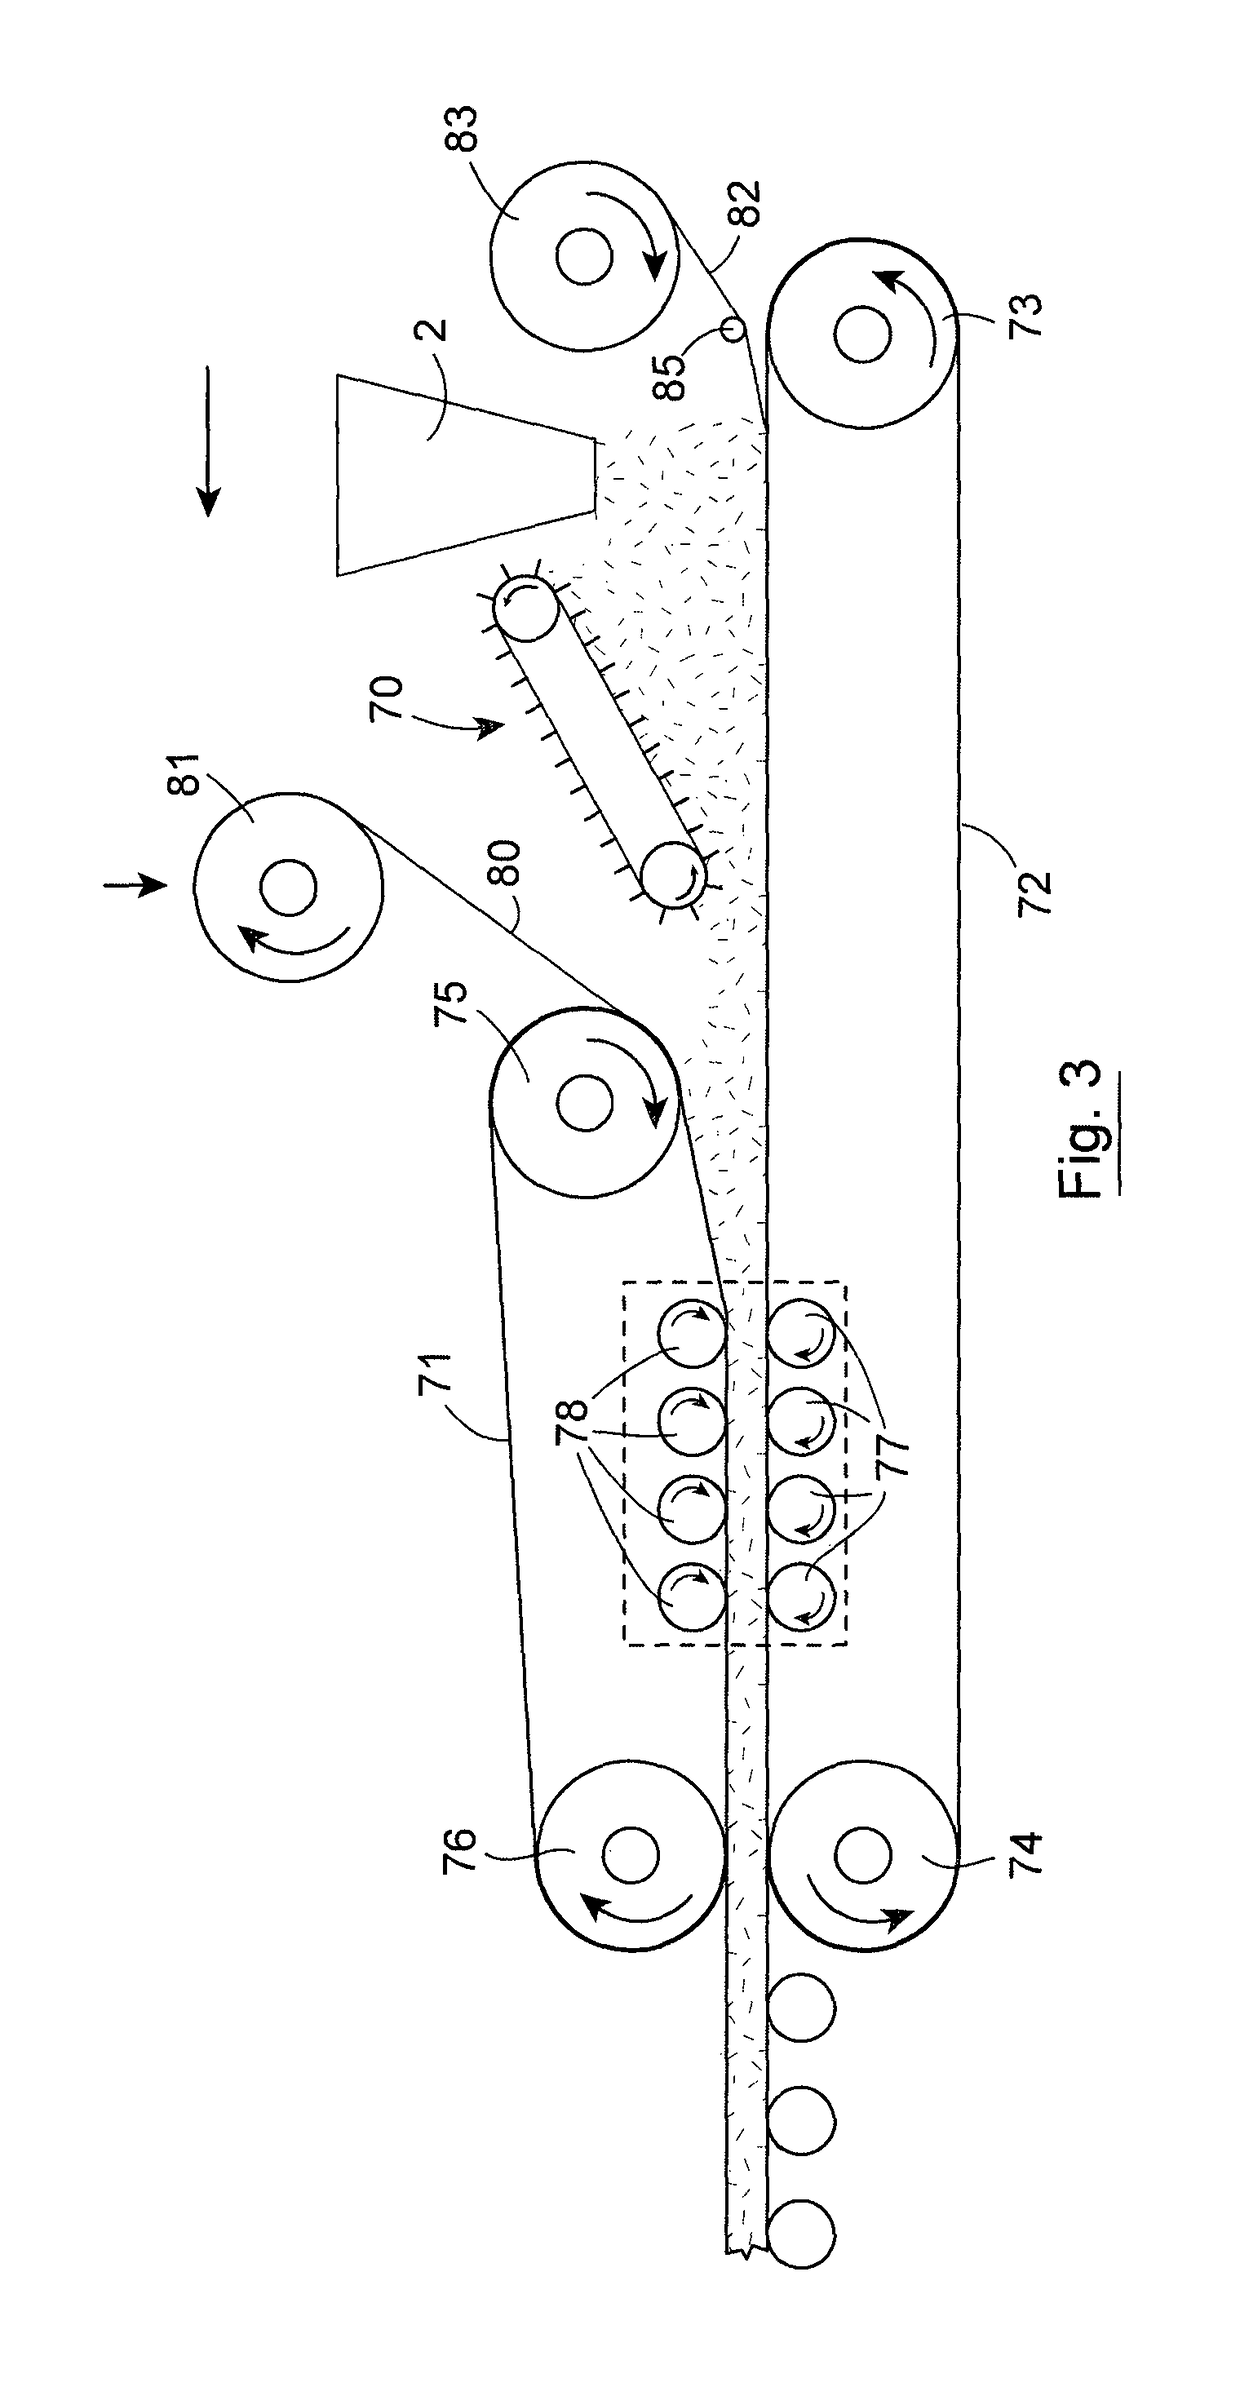 Method and apparatus for manufacturing an insulation panel